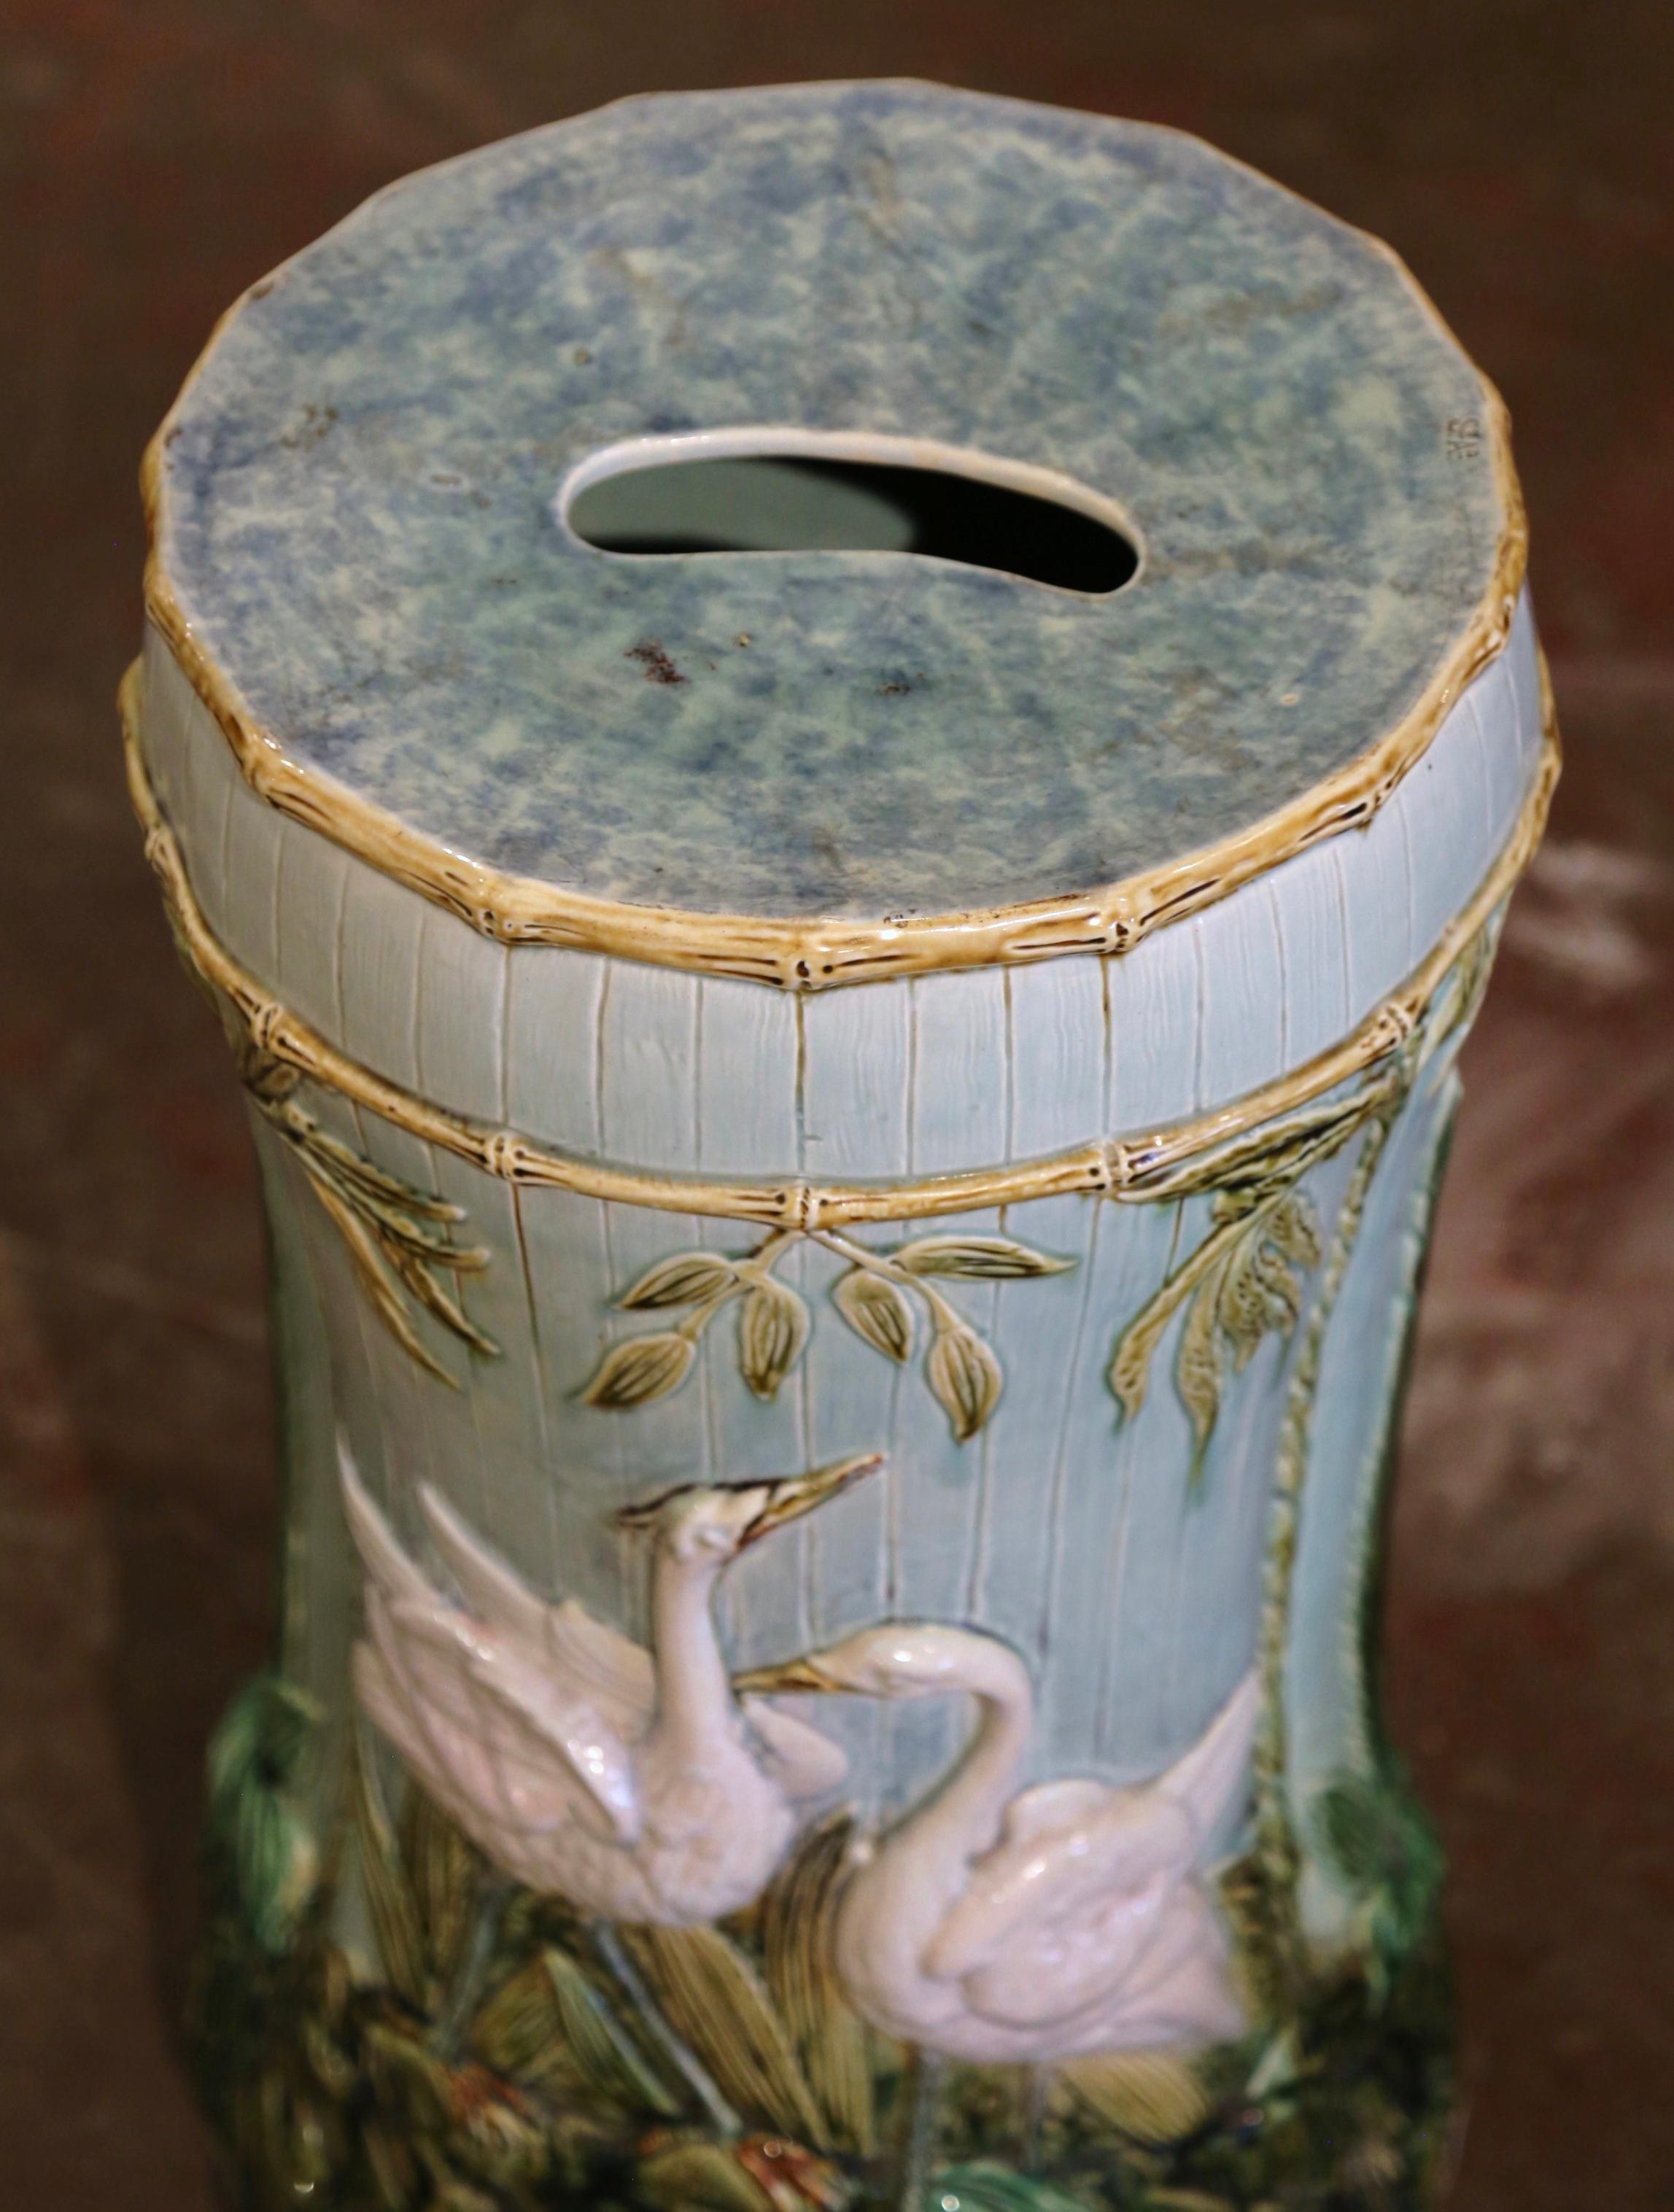 Decorate a patio or a den with this colorful antique majolica garden stool with bird motifs. Created in France circa 1890, the seating with central handle features wonderful swan decor in high relief on both sides, decorated with reef and foliage